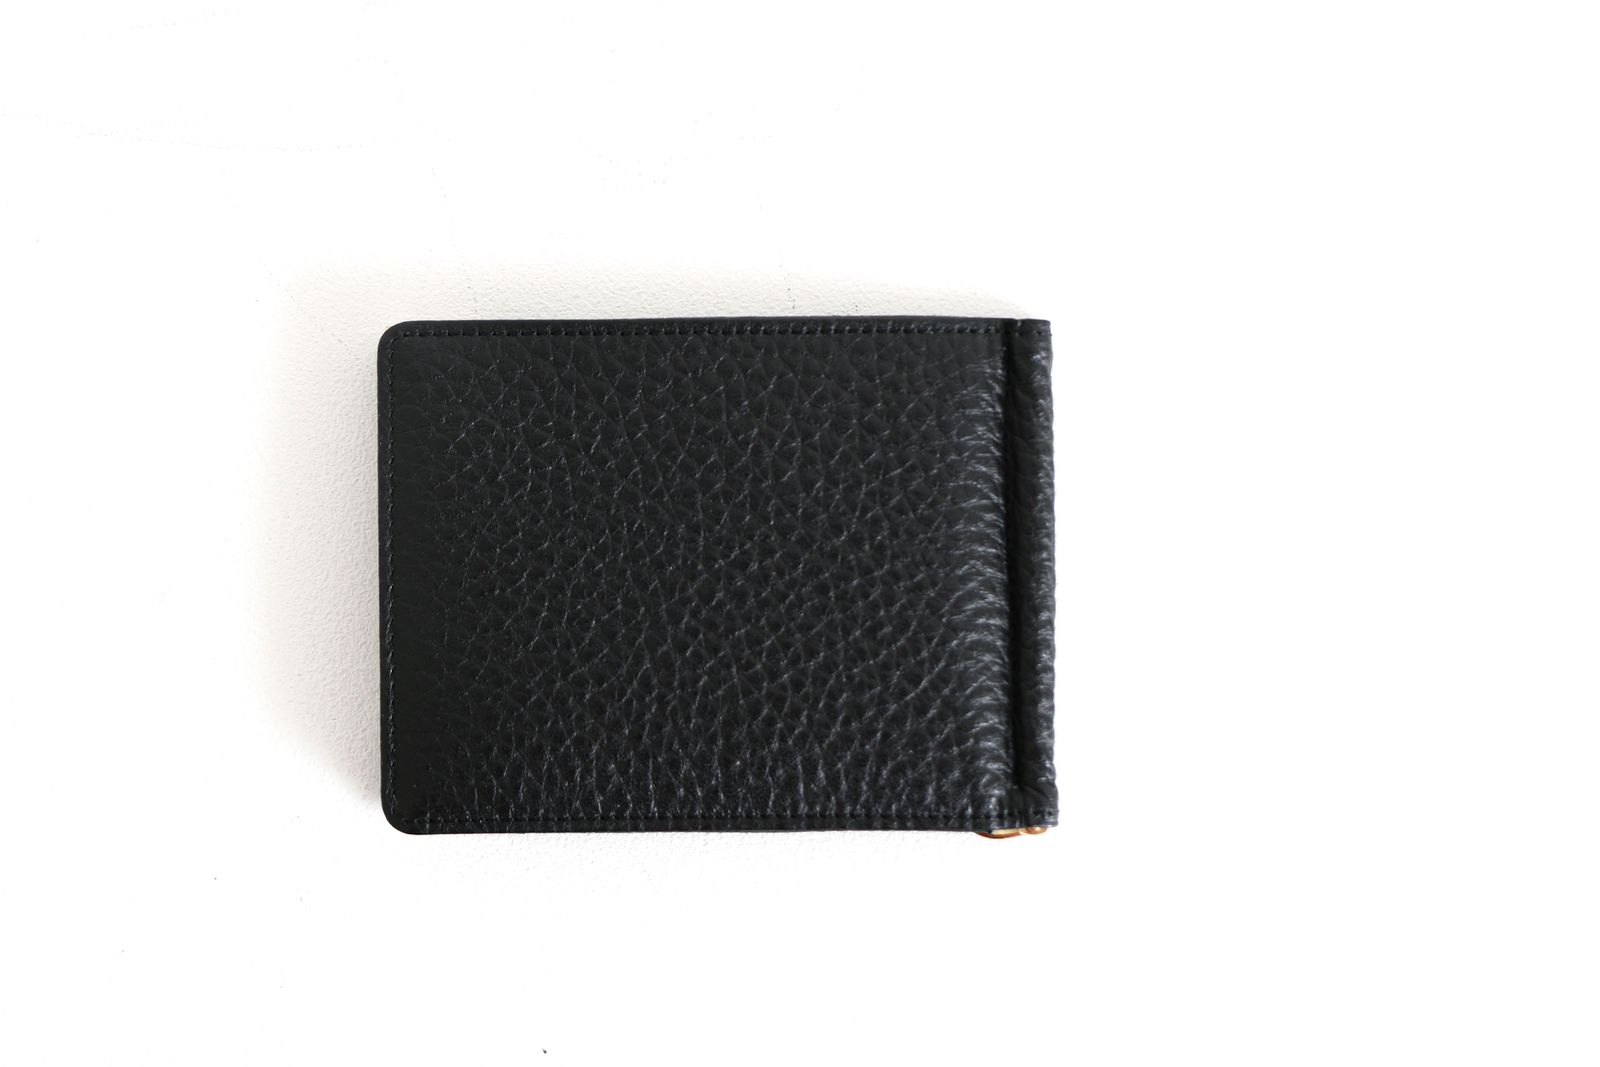 meanswhile - LEATHER MONEY CLIP (BLACK) / マネークリップ / 財布 | koko